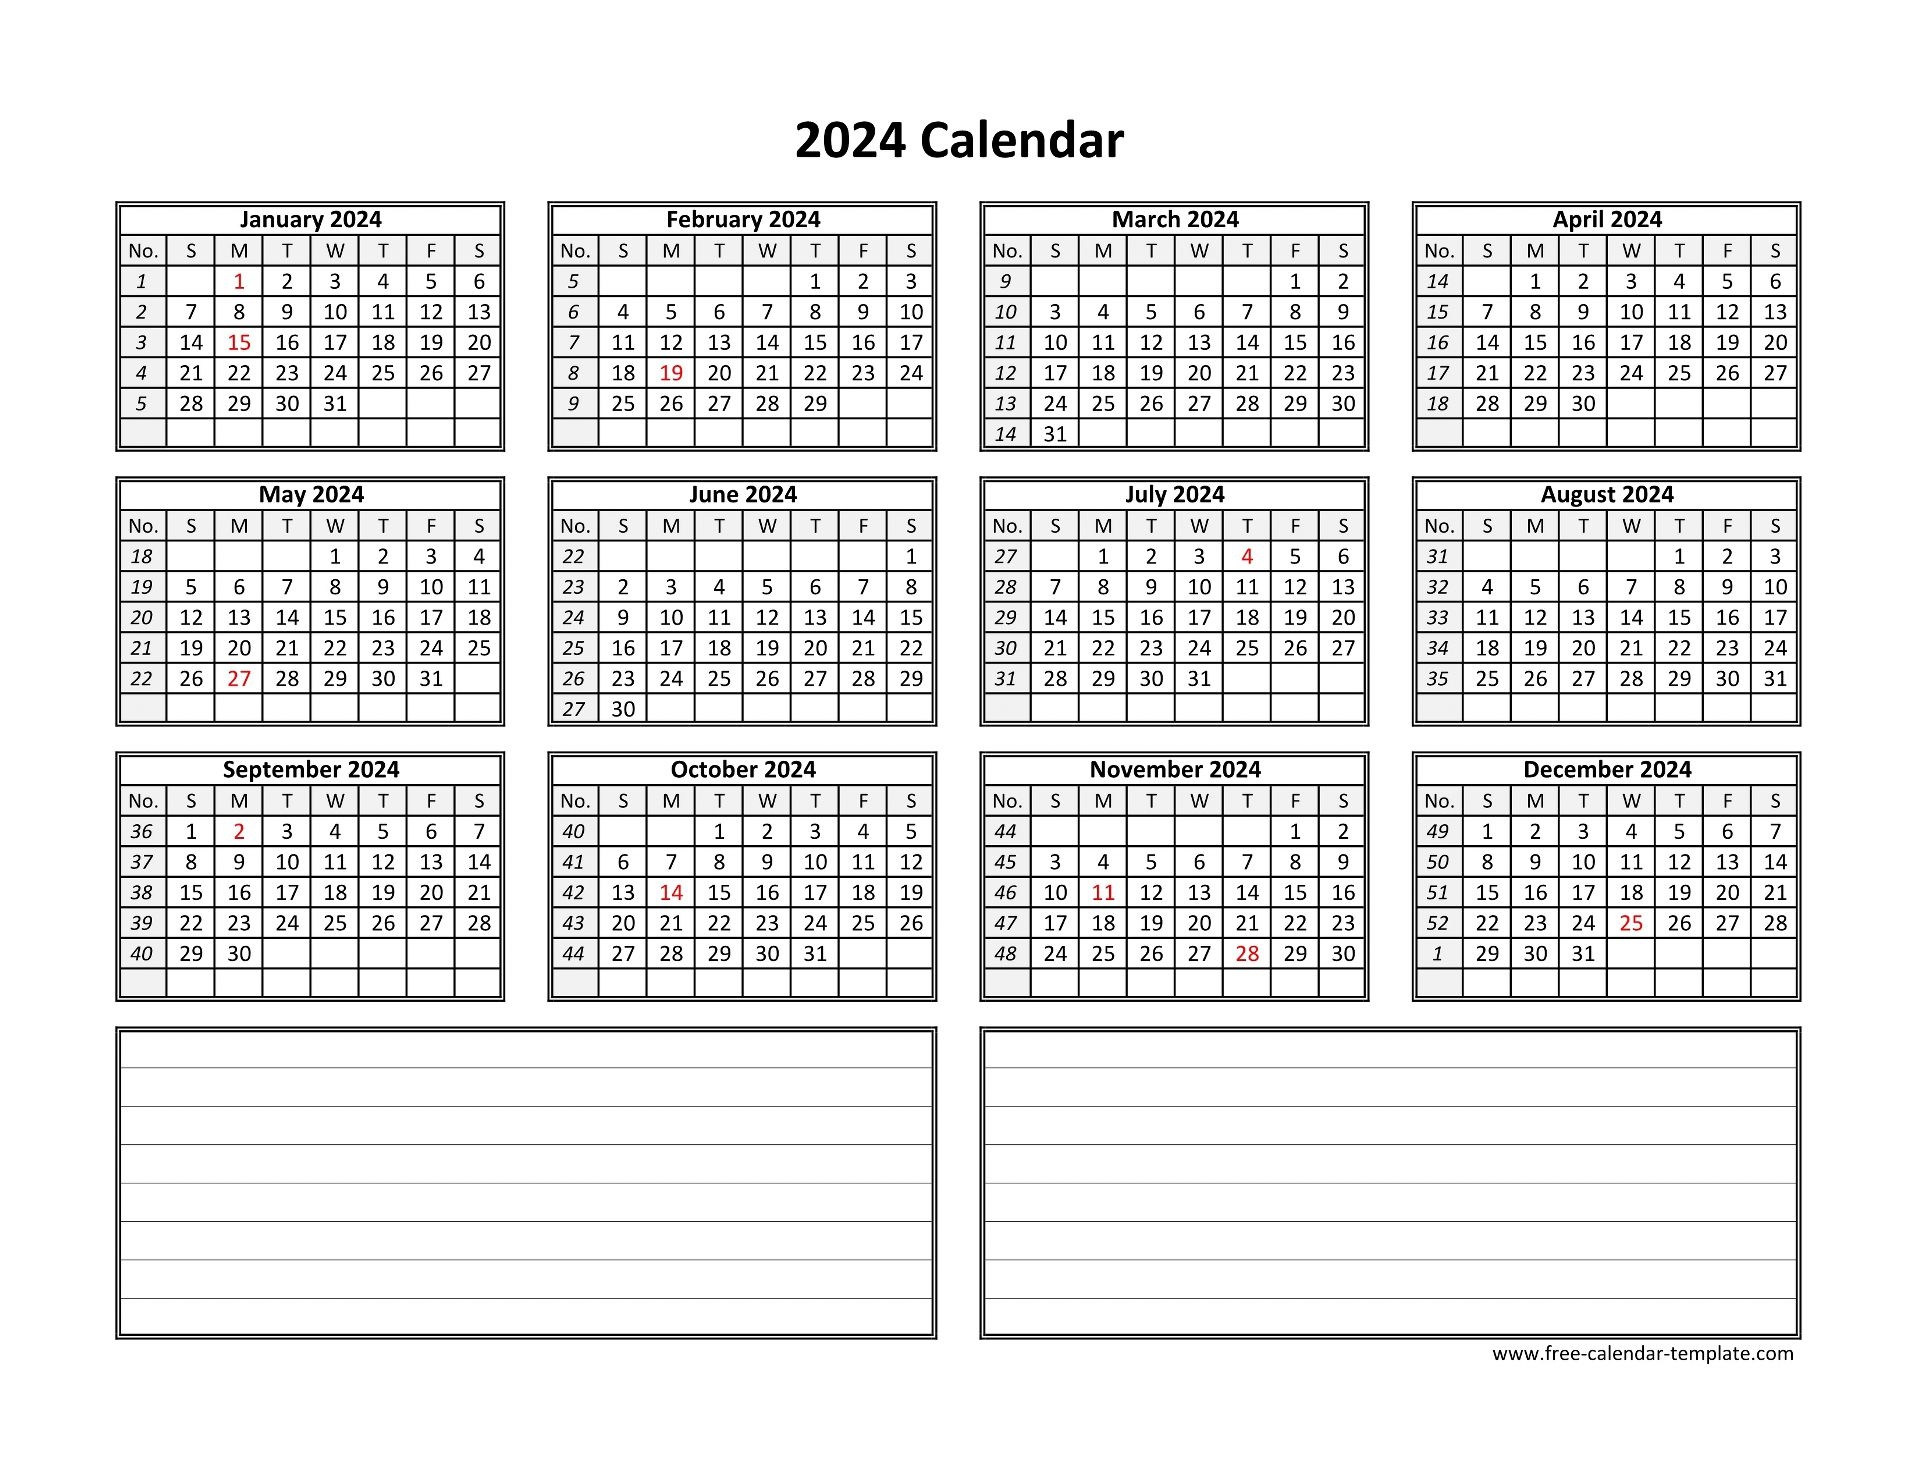 Yearly 2024 Calendar Printable With Space For Notes | Free regarding Free Printable Calendar 2024 Year With Notes Section